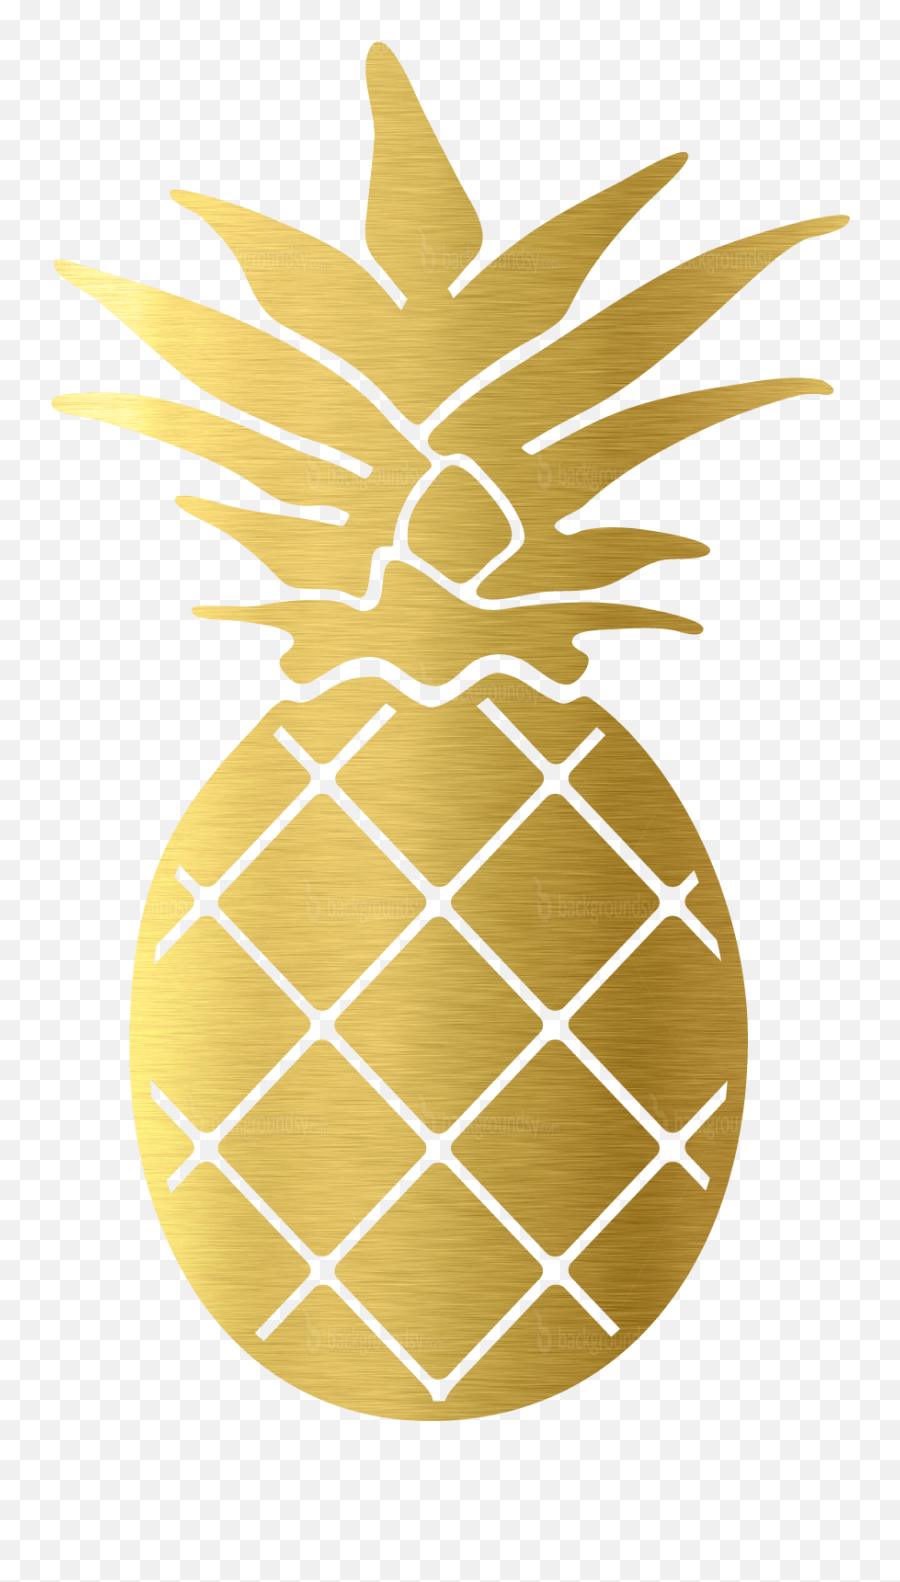 Pineapple Decal Sticker Clip Art - Pineapple Decal Png,Pineapple Transparent